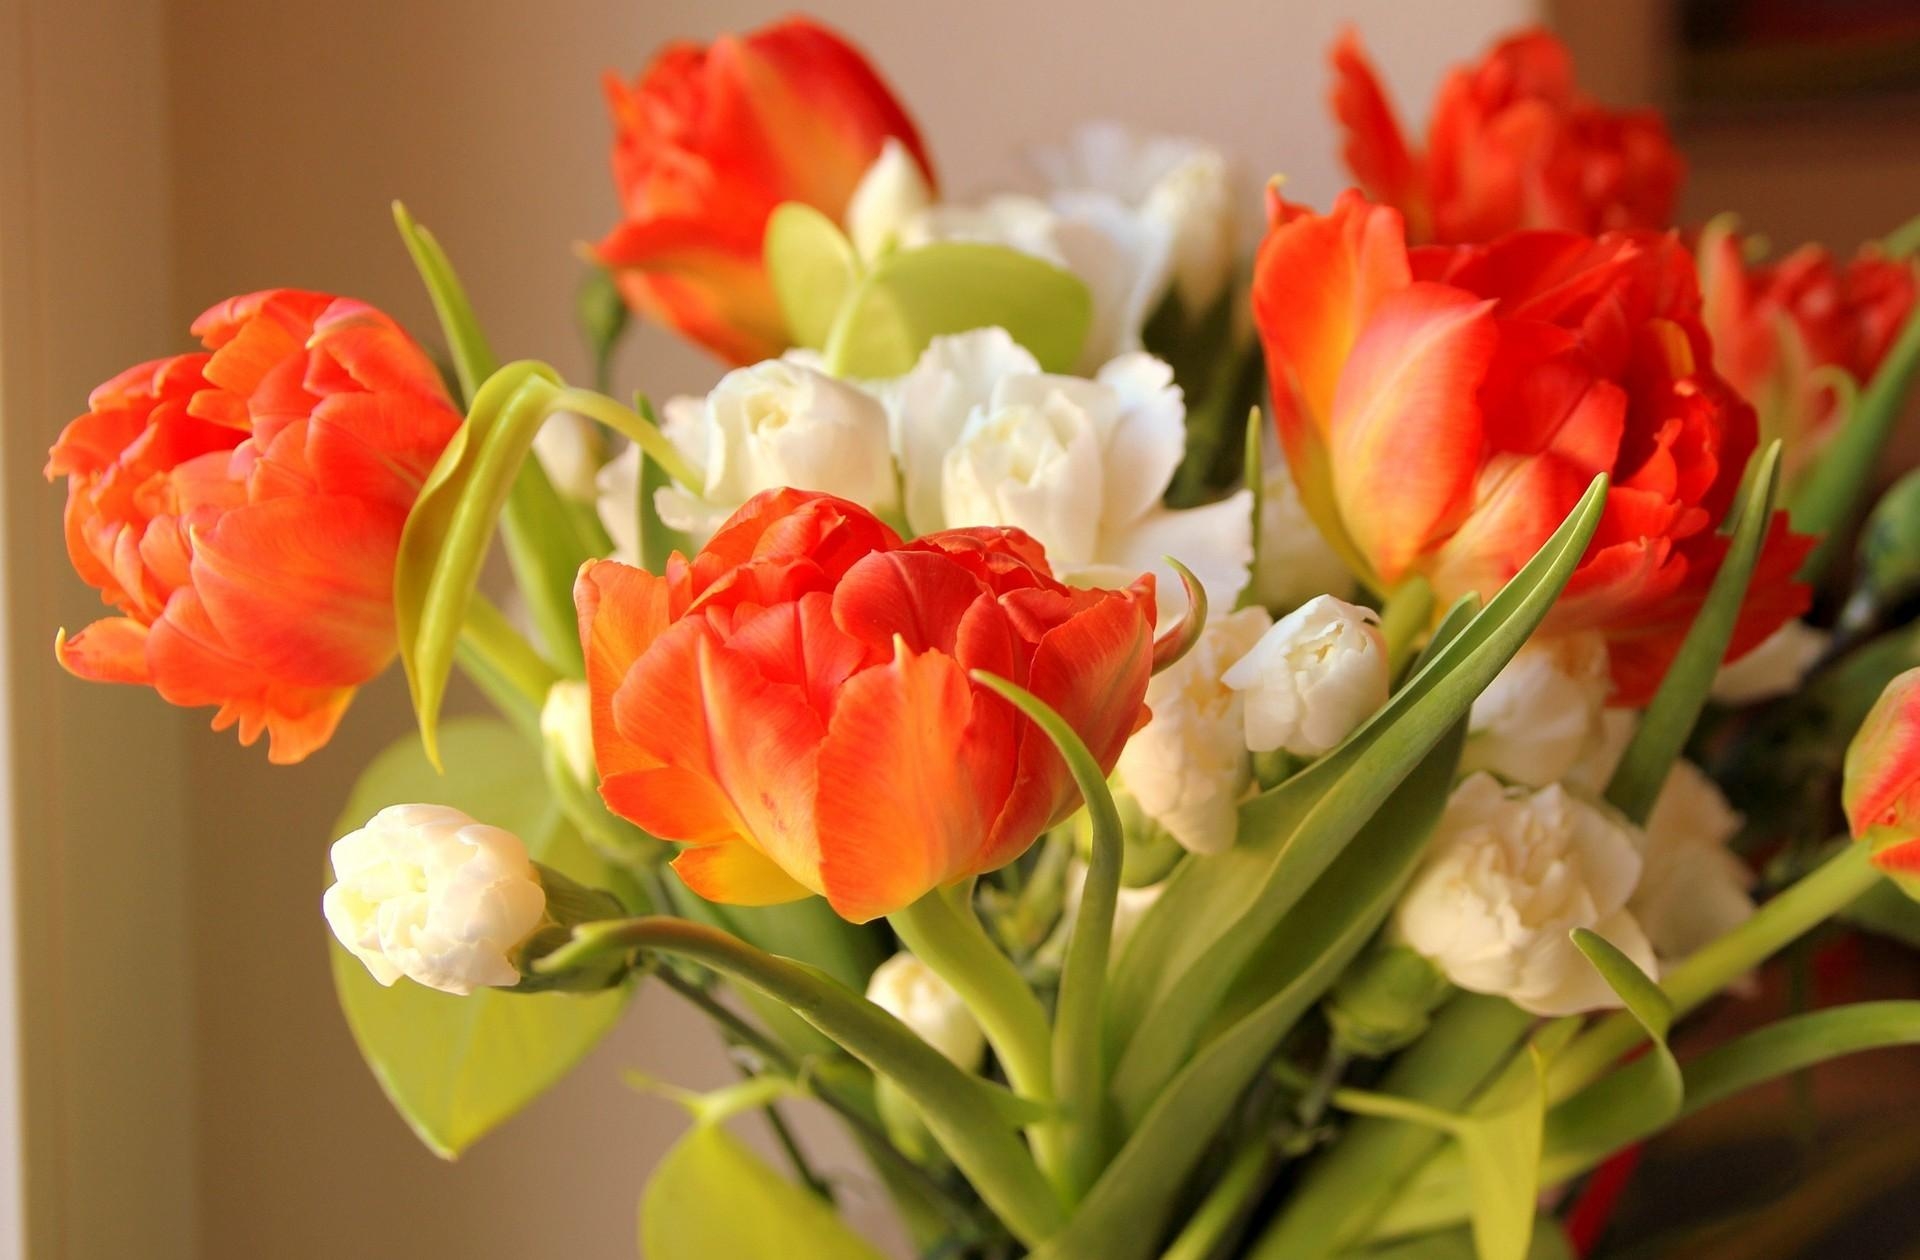  Tulips HQ Background Images